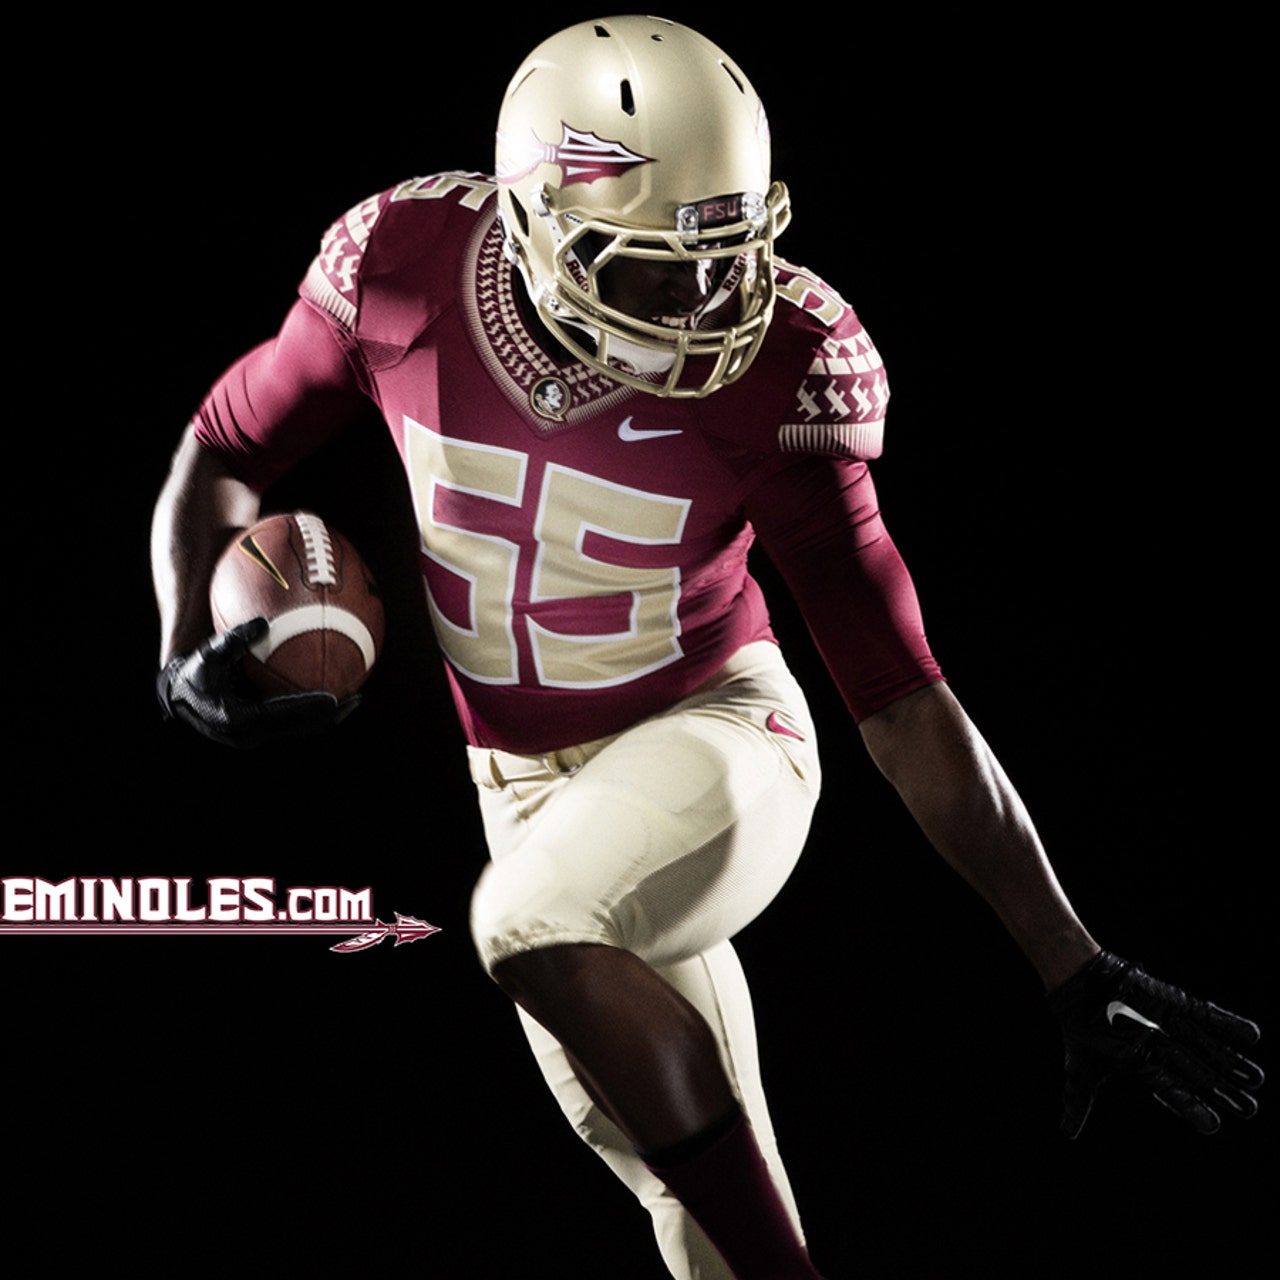 FSU unveils new football uniform redesign that will debut this